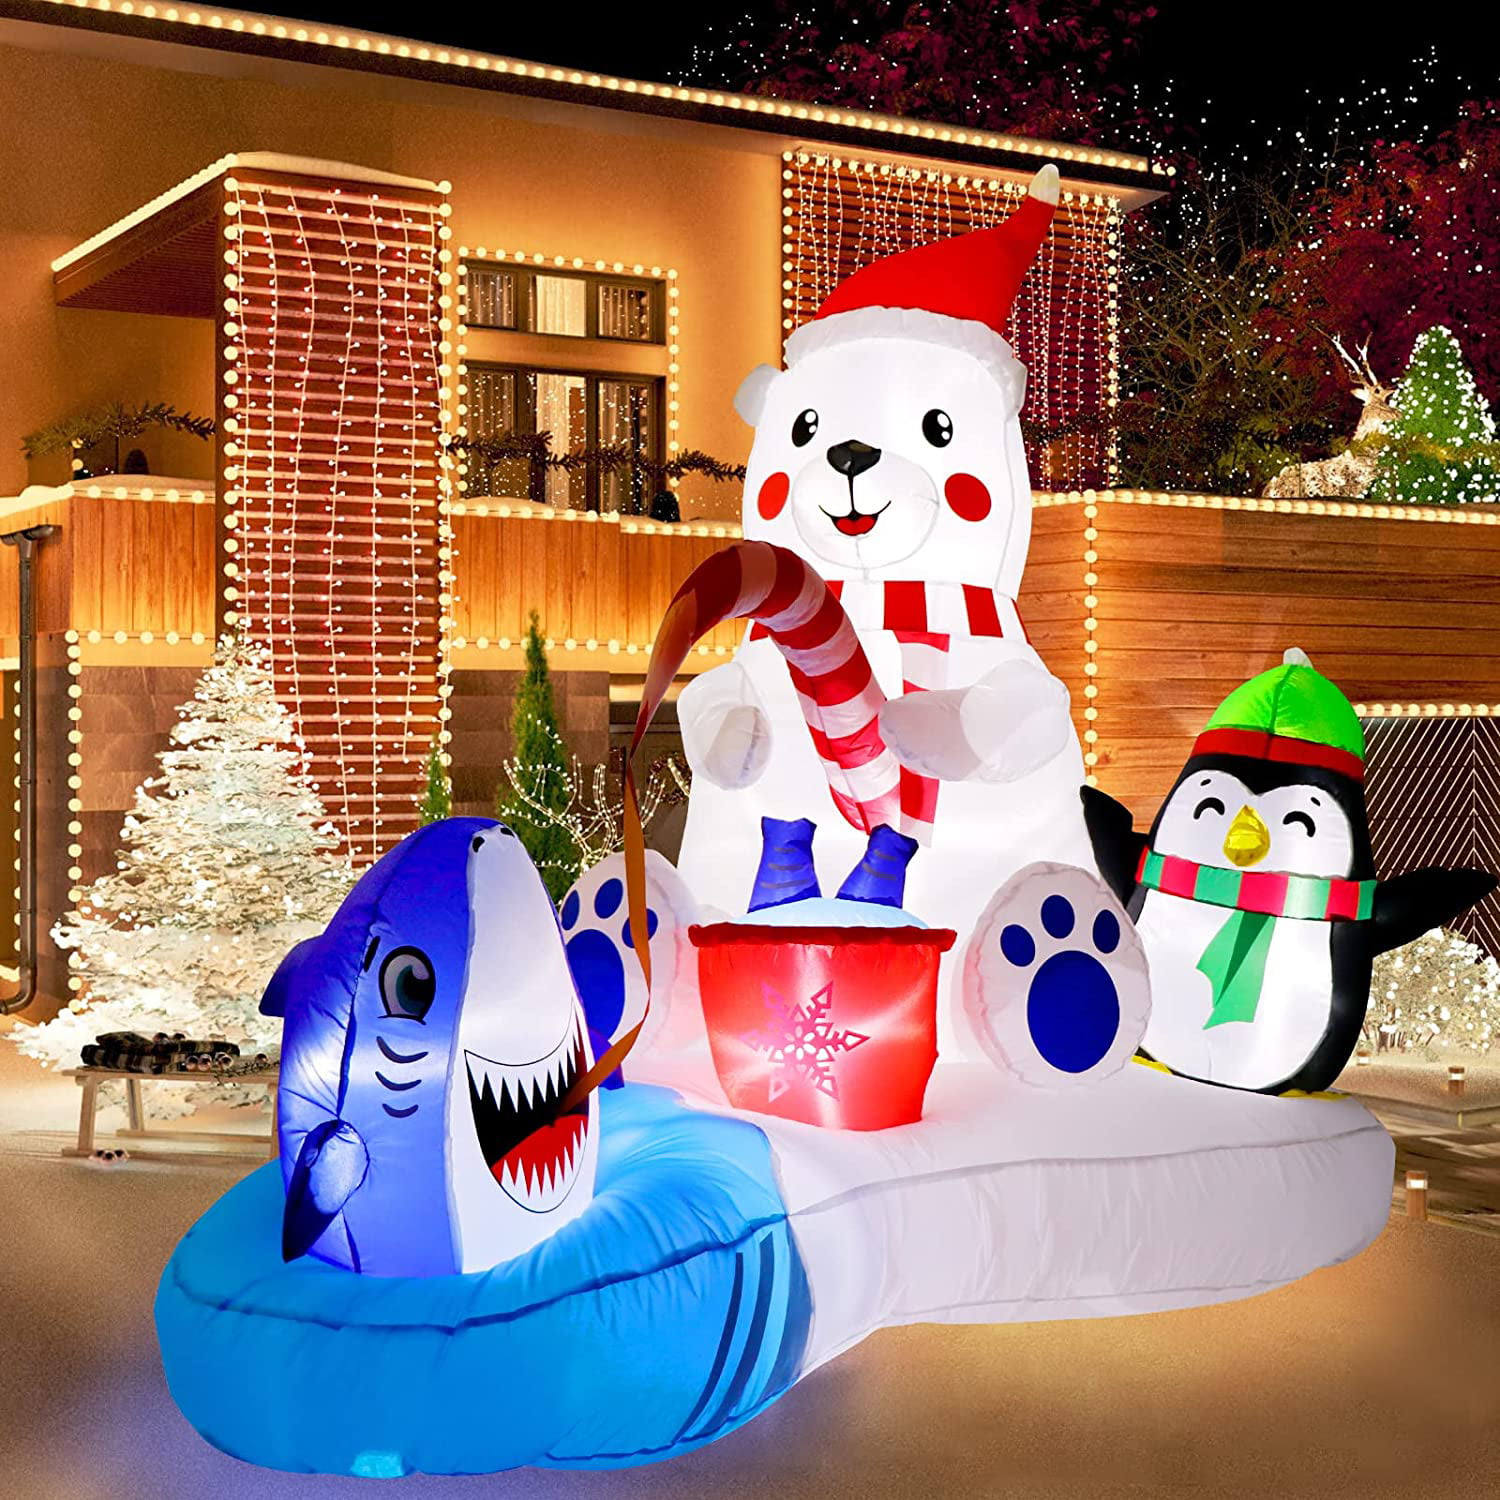 GUDELAK 6 Ft Christmas Inflatables Outdoor Decorations LED Light Up Polar Bear and Penguin Blow Up Inflatable Christmas Decorations for Yard Garden Lawn Indoor Xmas Holiday Party Decor 